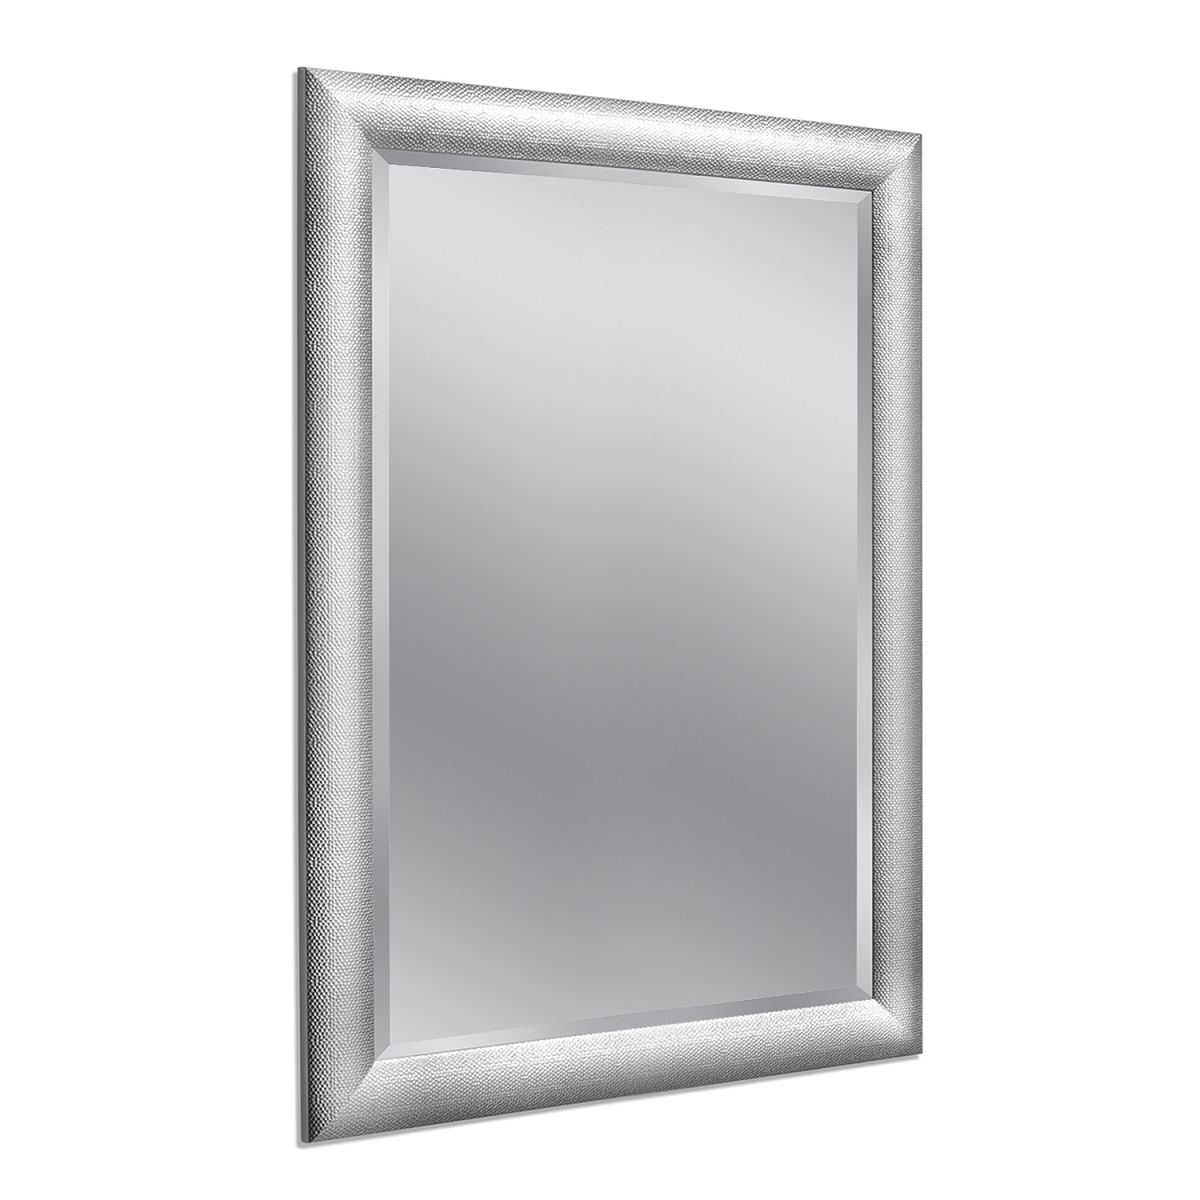 8117 36 X 46 In. Hammered Wall Mirror Chrome